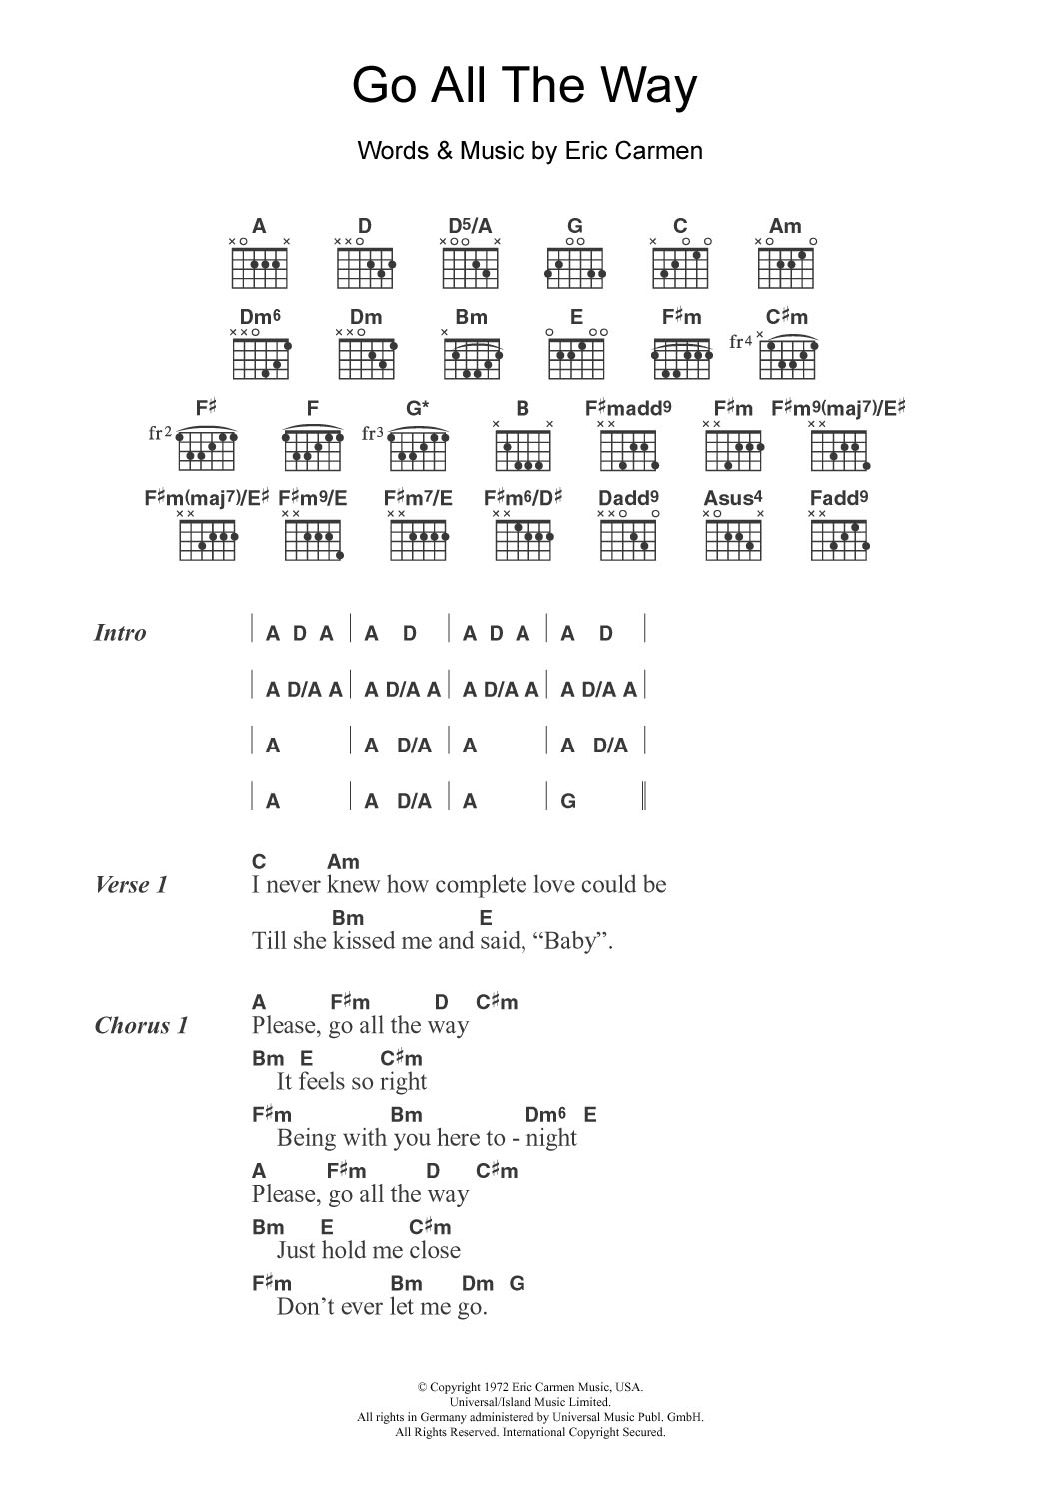 Download The Raspberries Go All The Way Sheet Music